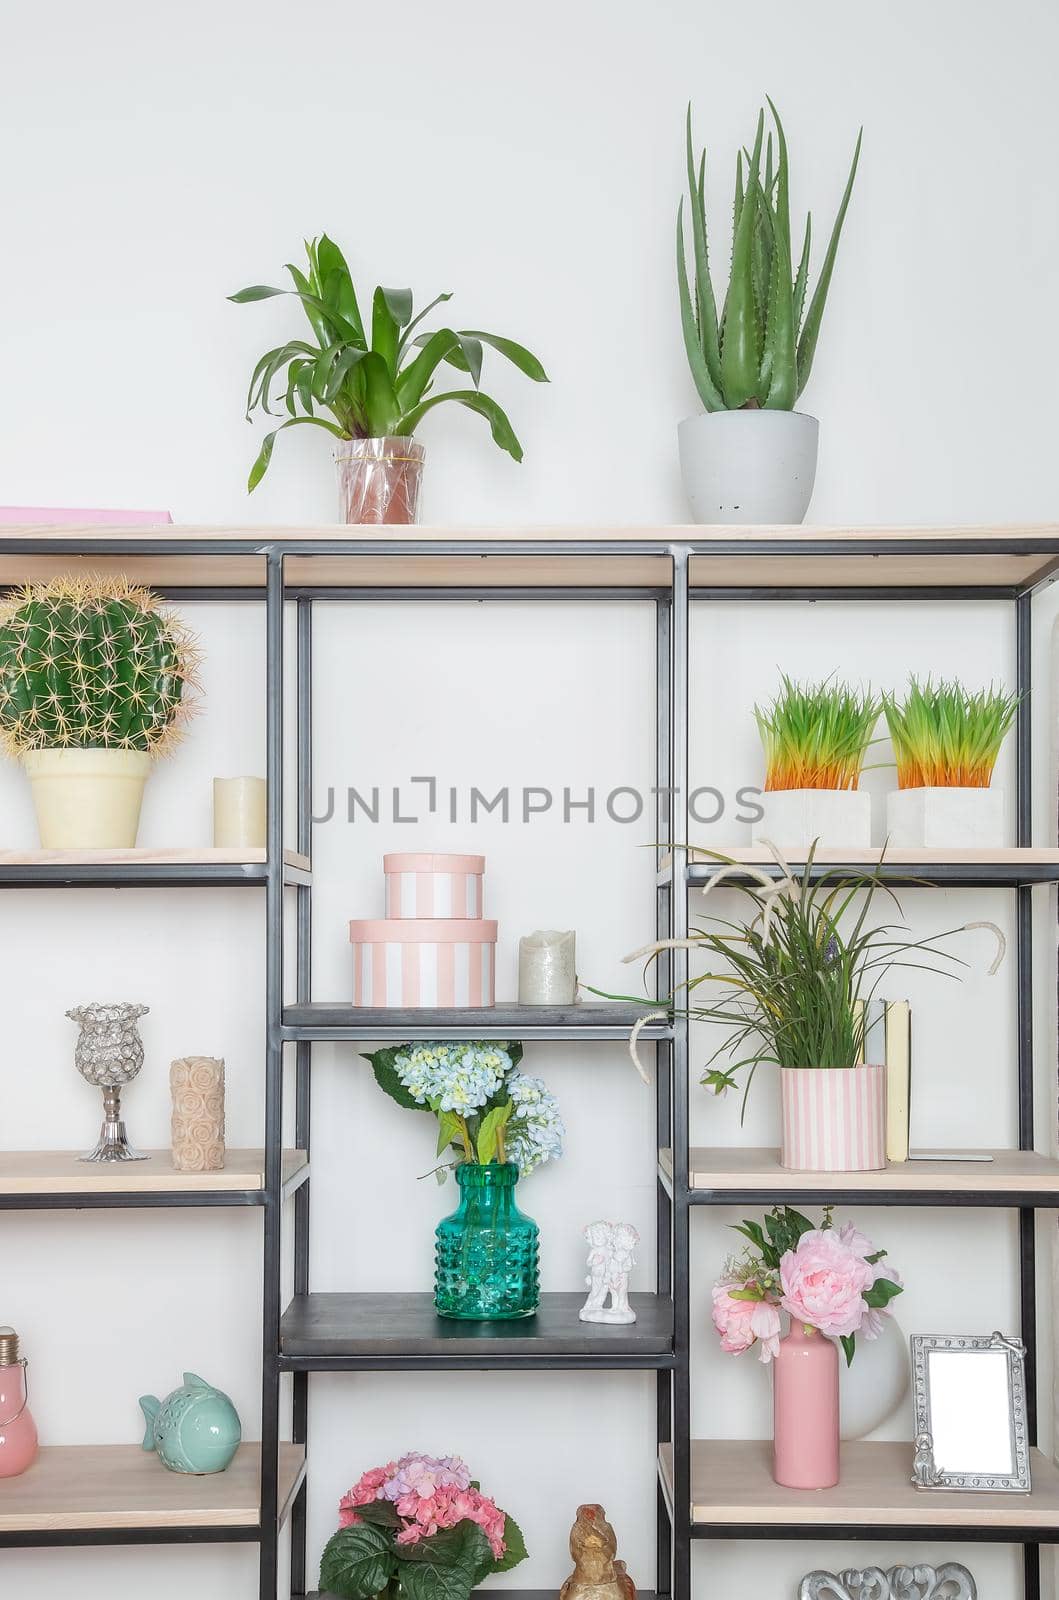 Flowers and decorative decorations on a metal rack in the style of minimalism in the living room in a Scandinavian style